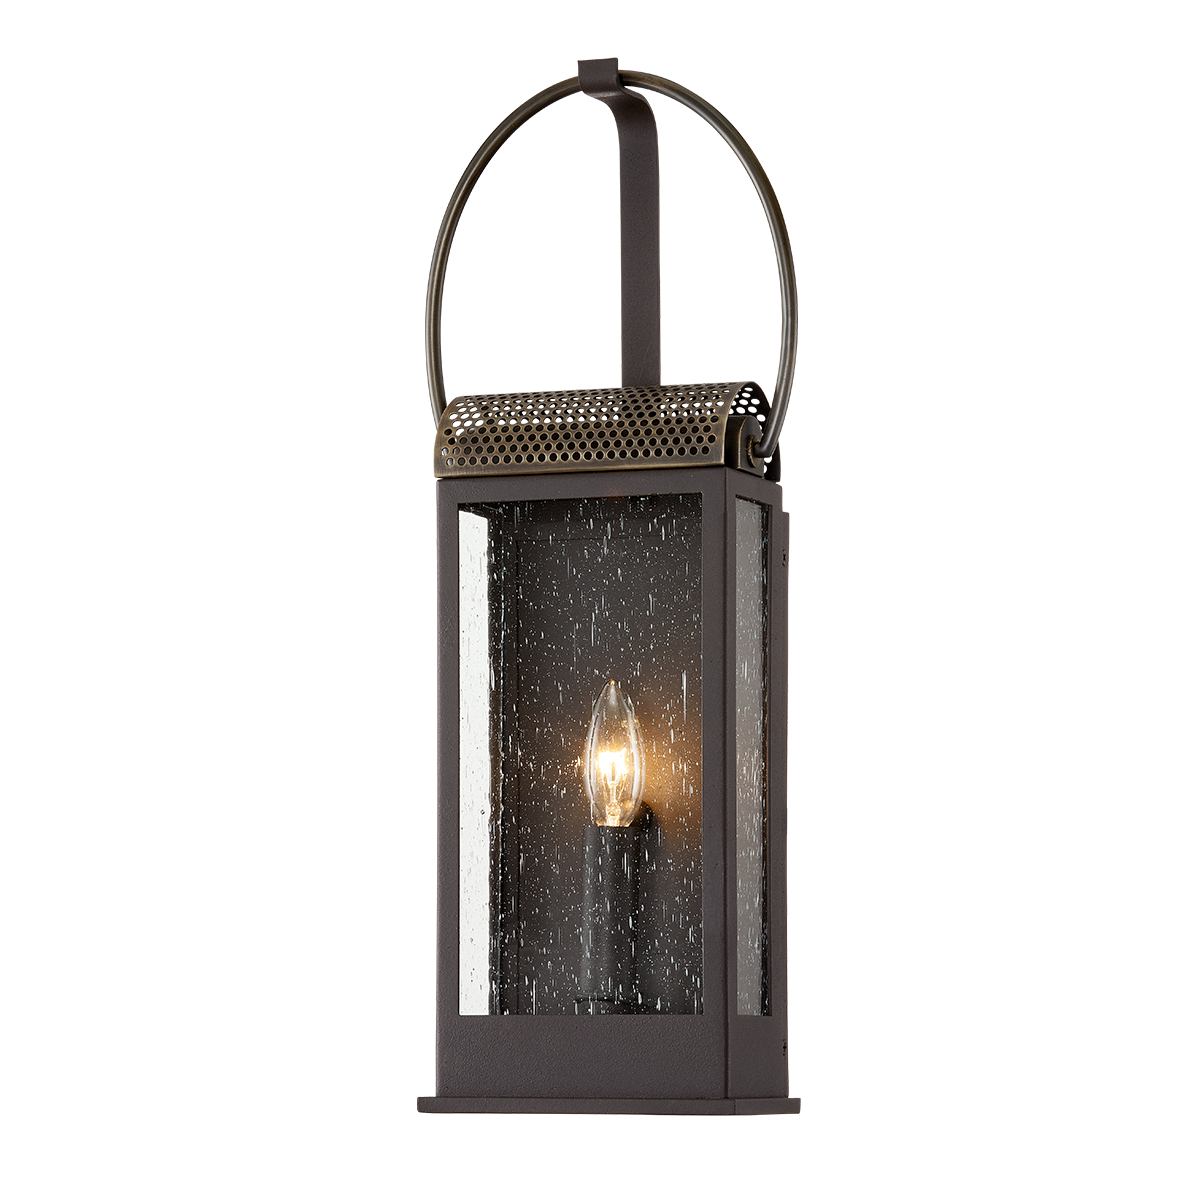 Troy Lighting HOLMES 1LT WALL B7421 Outdoor l Wall Troy Lighting BRONZE AND BRASS  